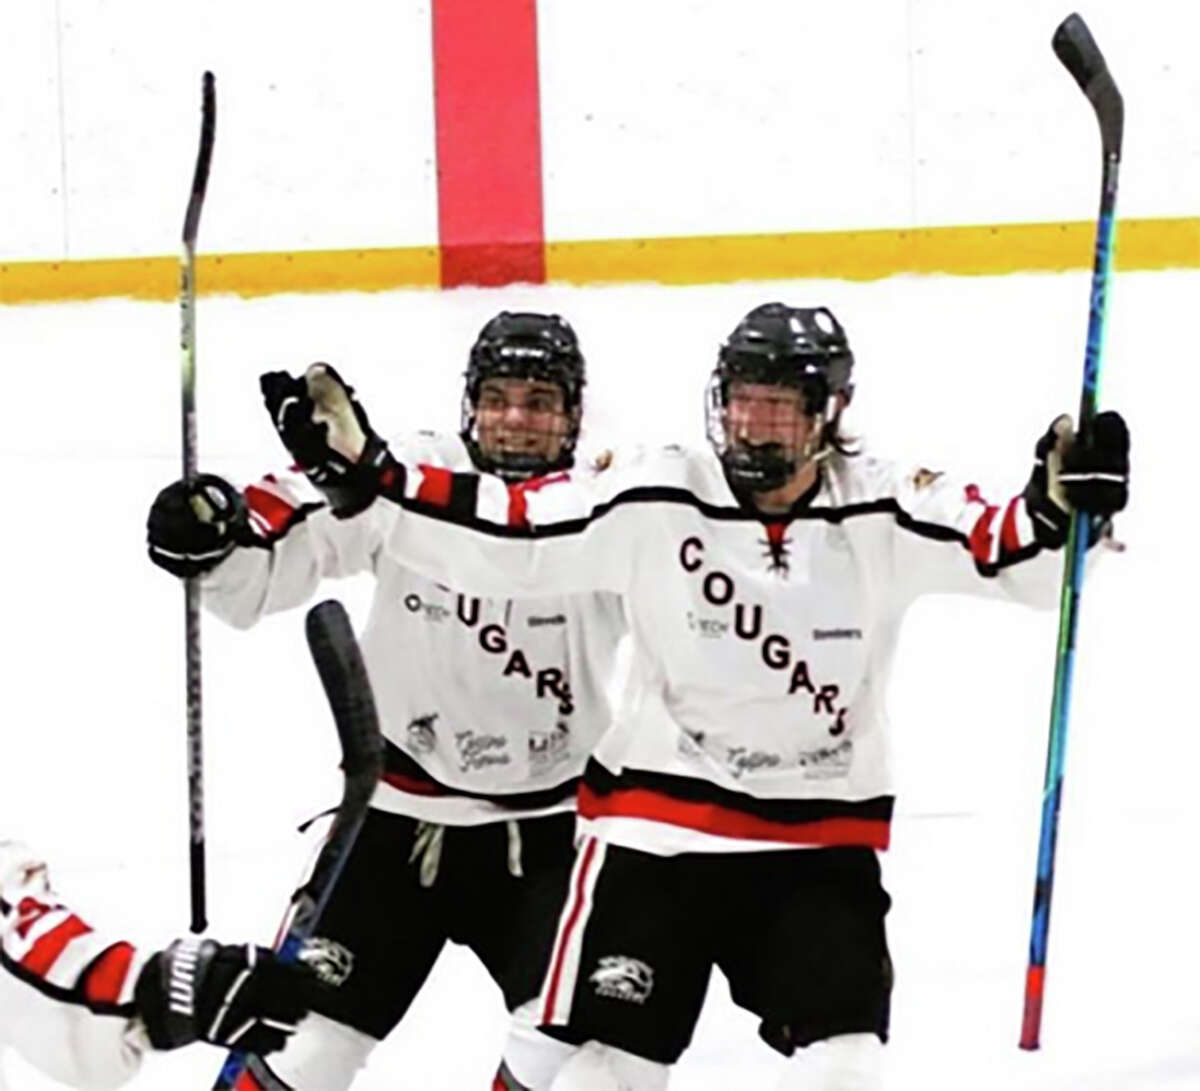 SIUE players celebrate a goal earlier this season. The Cougars will face Bradley at 7:30 Friday night at the East Alton Ice Arena in special "Glow Game," that will feature glow sticks and thunder sticks distributed to fans at the East Alton Ice Arena.